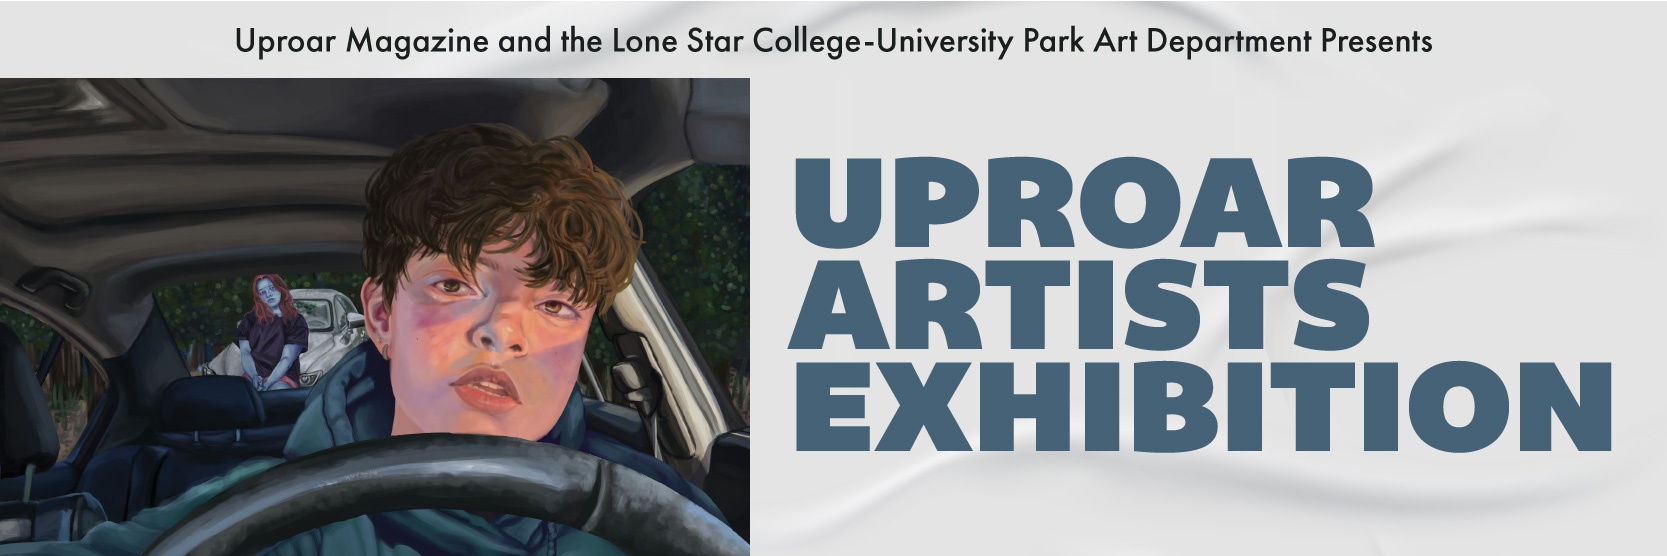 Uprar Magazine and the Lone Star College-University Park Art Department Presents UPROAR ARTISTS EXHIBITION